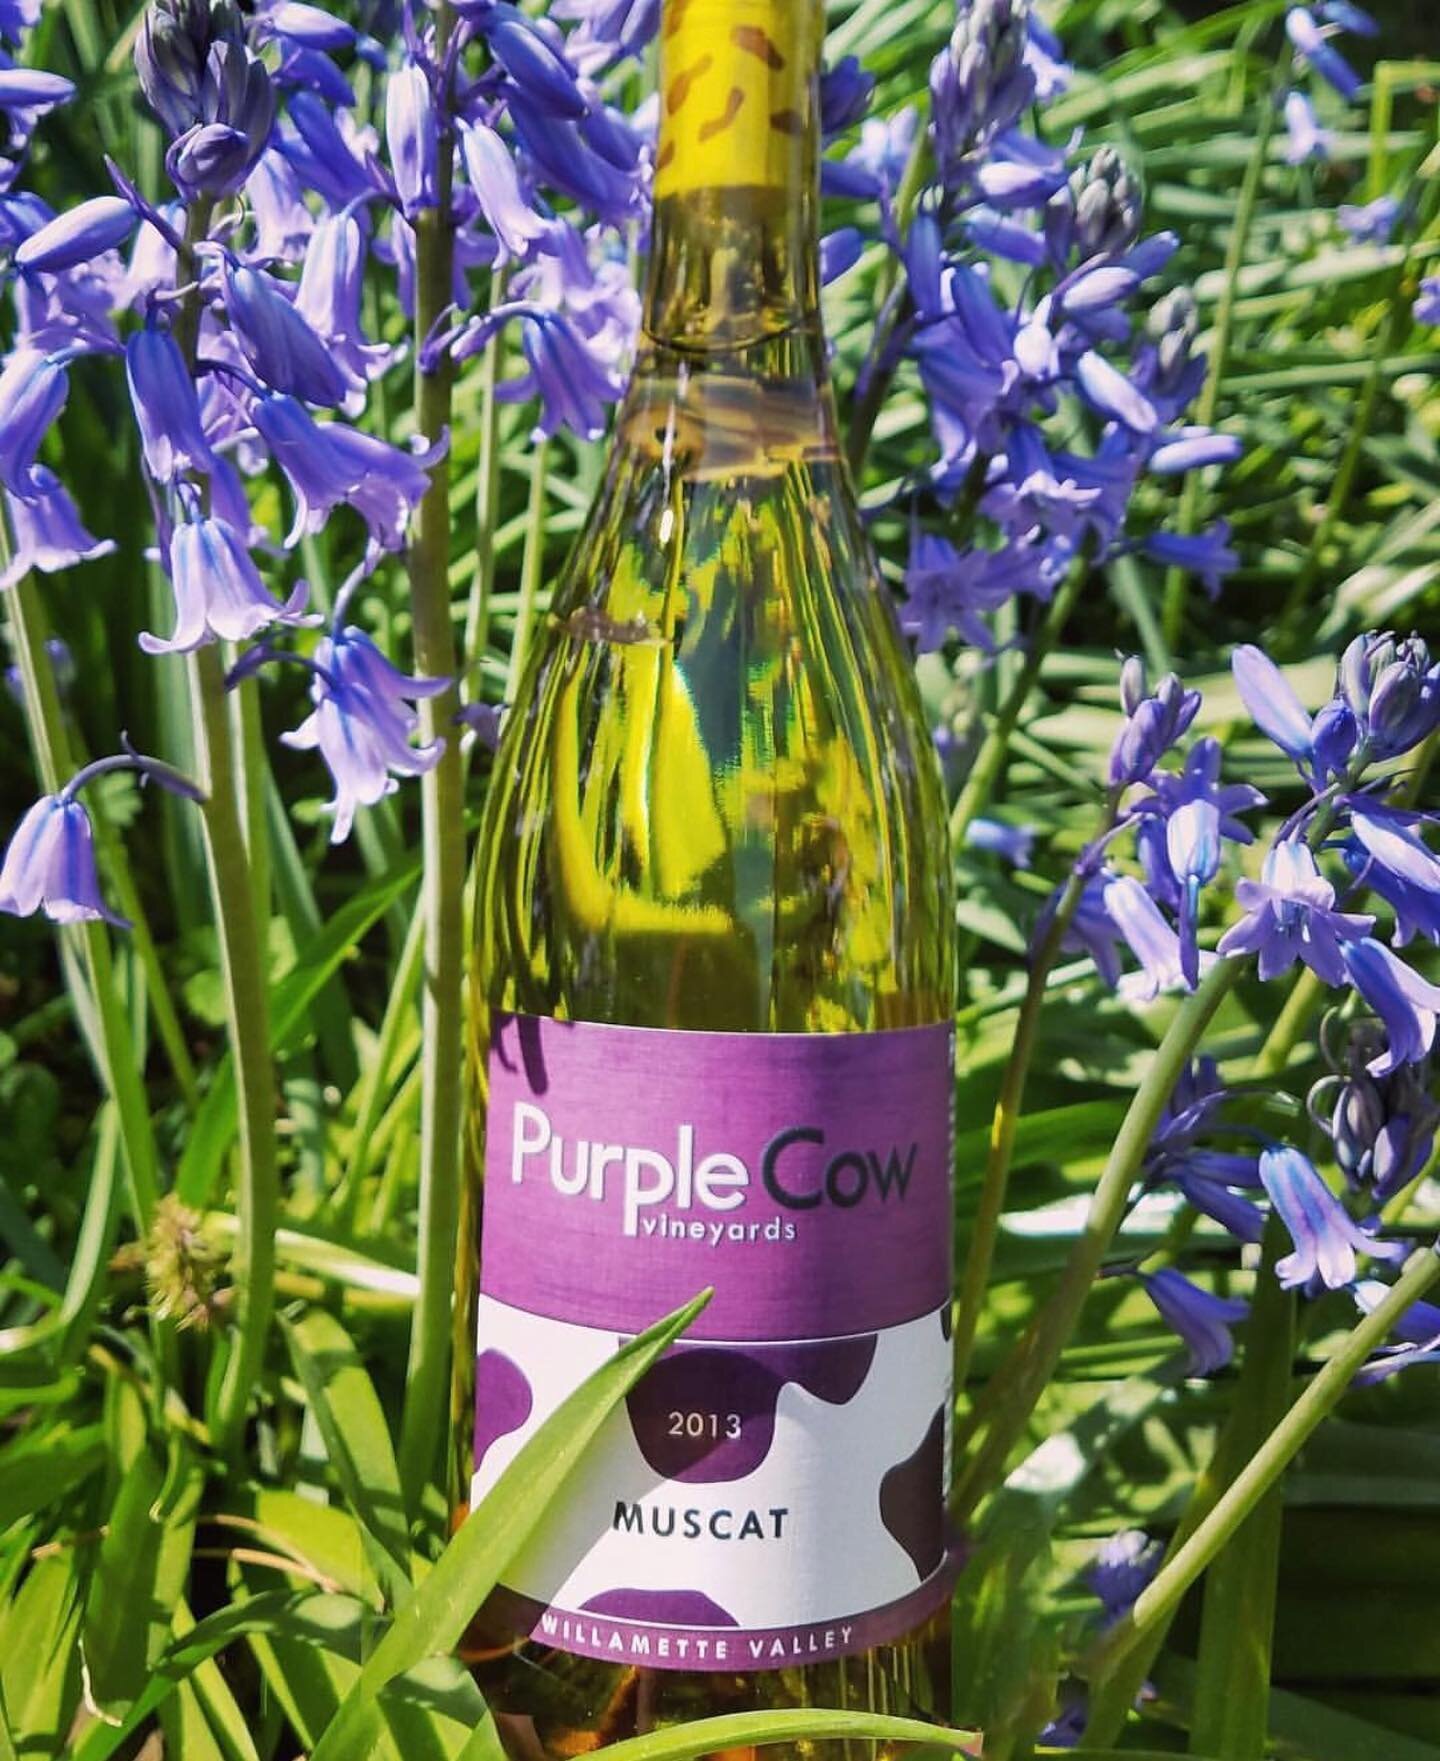 The perfect summer sip!

With its fruity and floral aromas our Muscat has refreshing notes of pear, apple, and citrus flavors.&nbsp;

Best served chilled with strong French cheeses! #Cheers

𝕋𝕒𝕤𝕥𝕖.𝔽𝕠𝕣.𝕐𝕠𝕦𝕣𝕤𝕖𝕝𝕗
#summersips #summer #tim